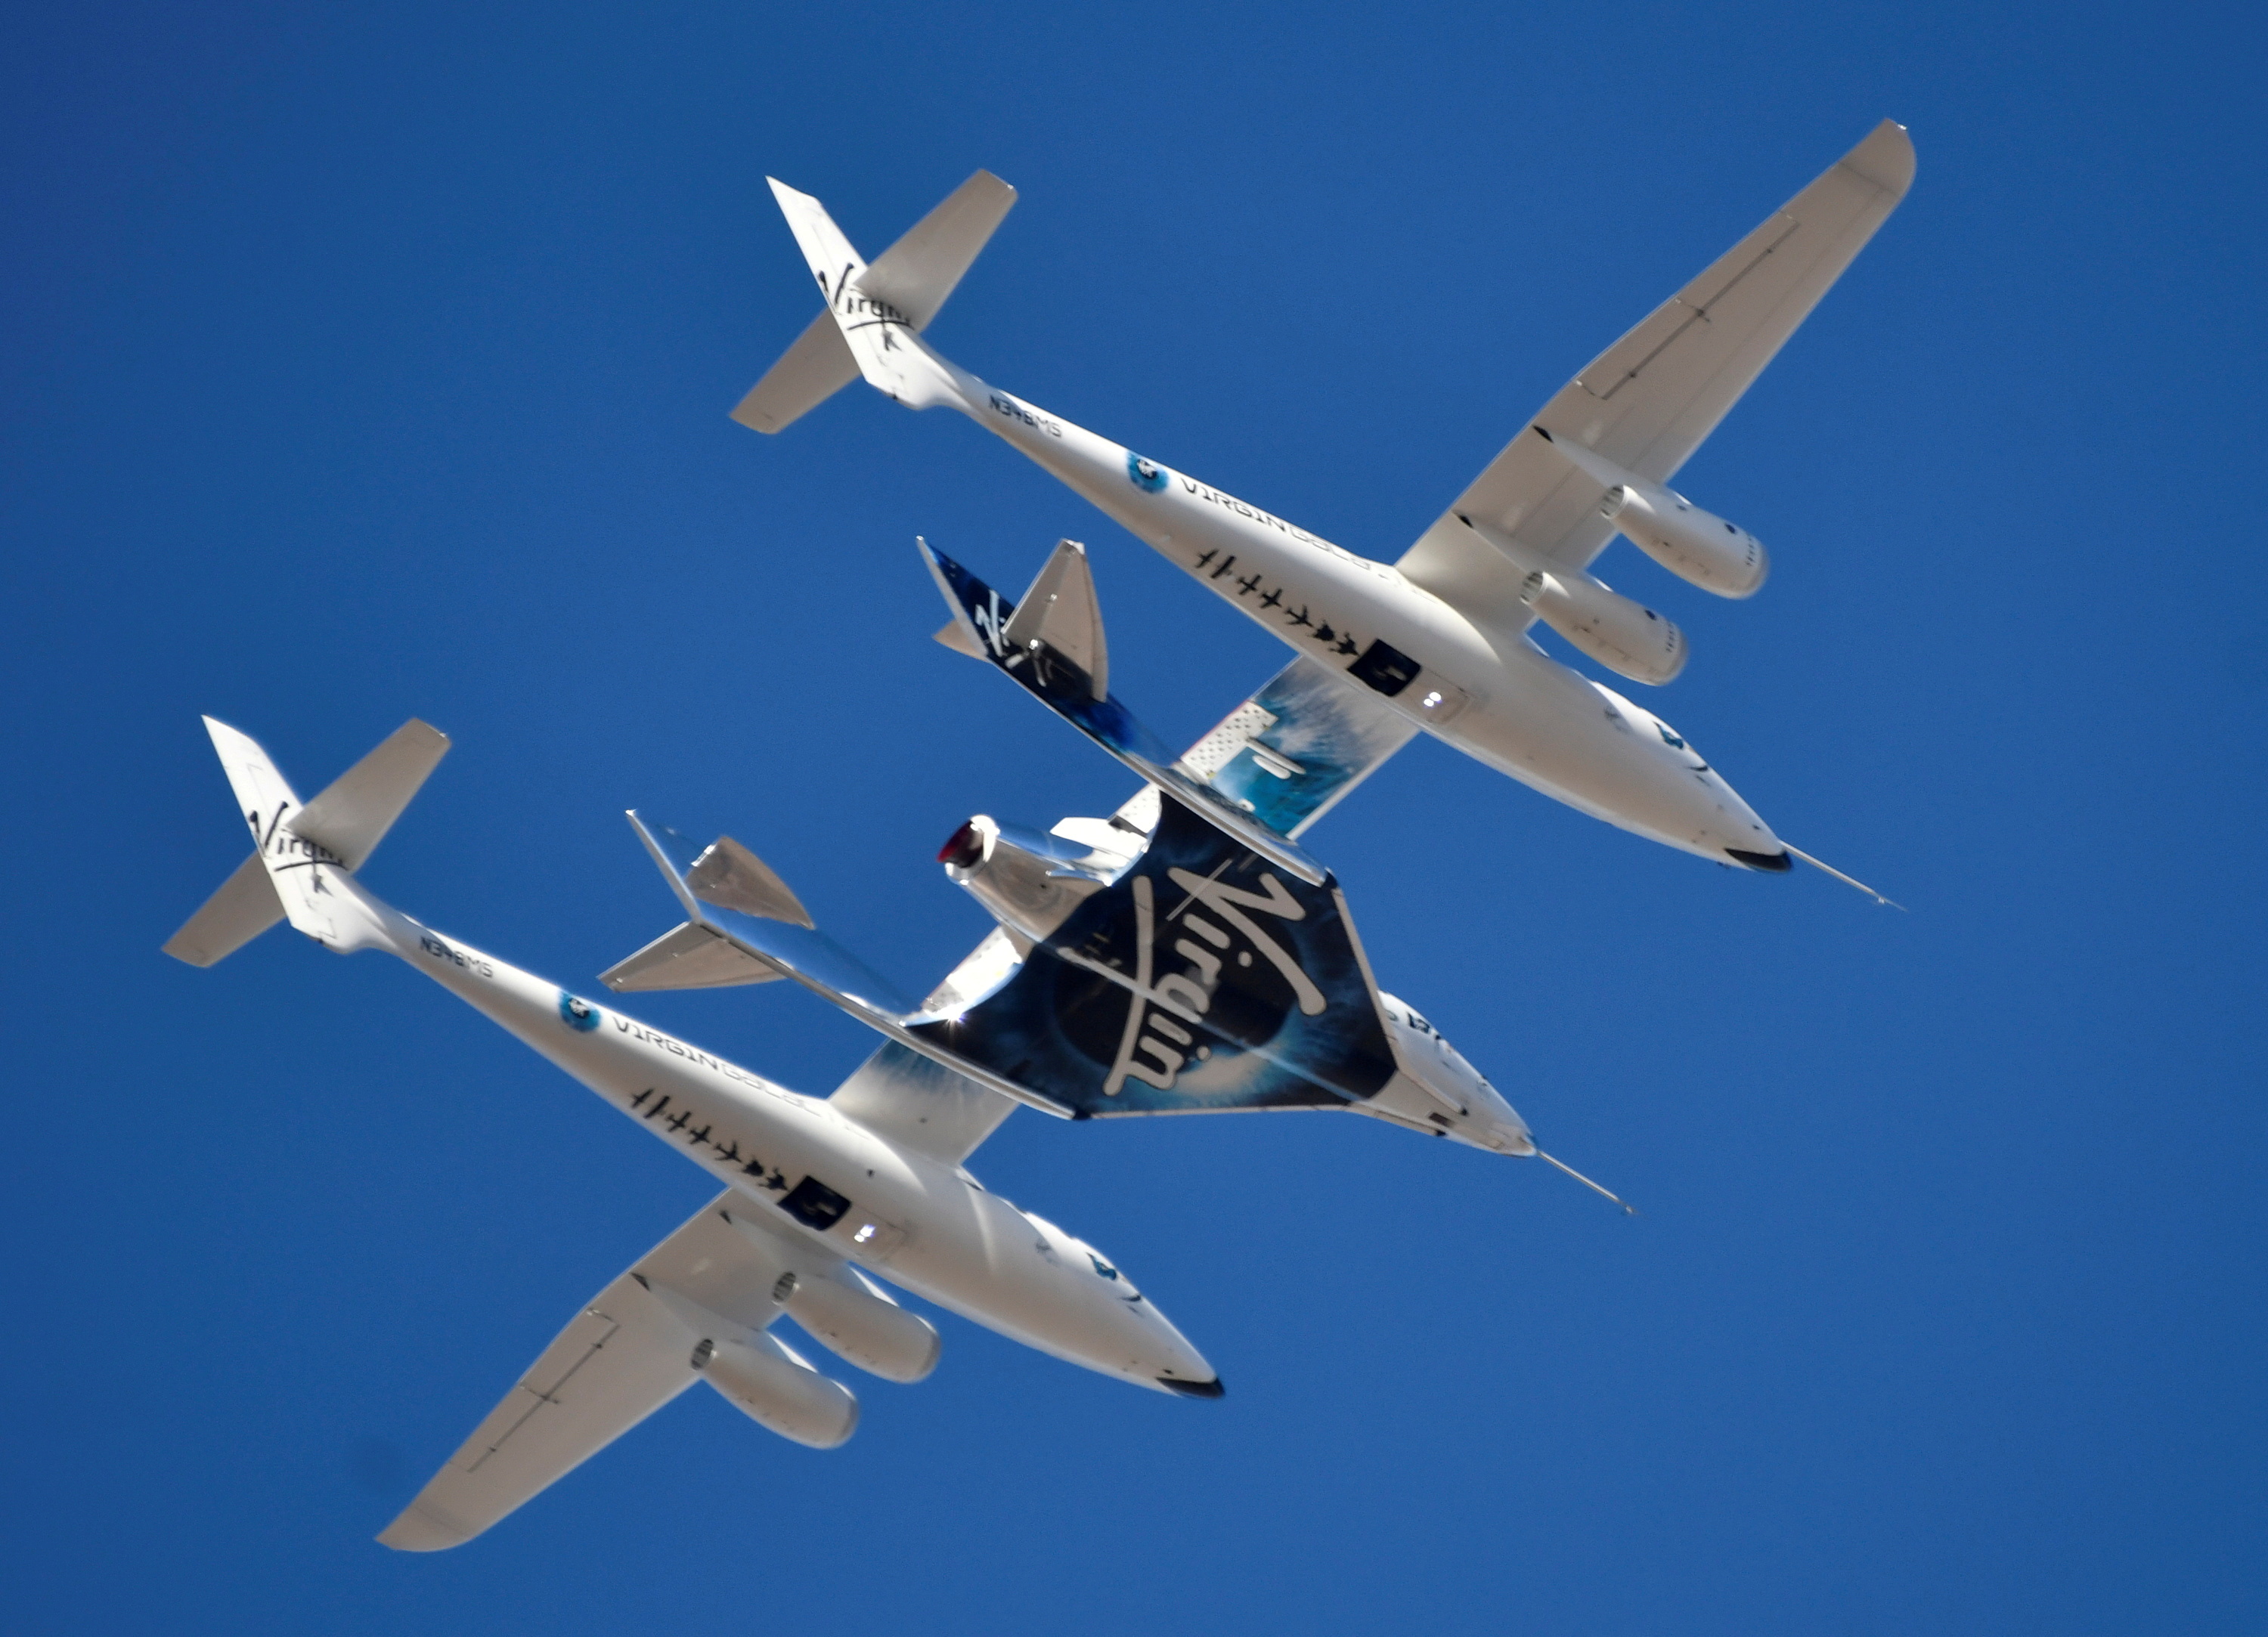 Virgin Galactic rocket plane, the WhiteKnightTwo carrier airplane, with SpaceShipTwo passenger craft takes off from Mojave Air and Space Port